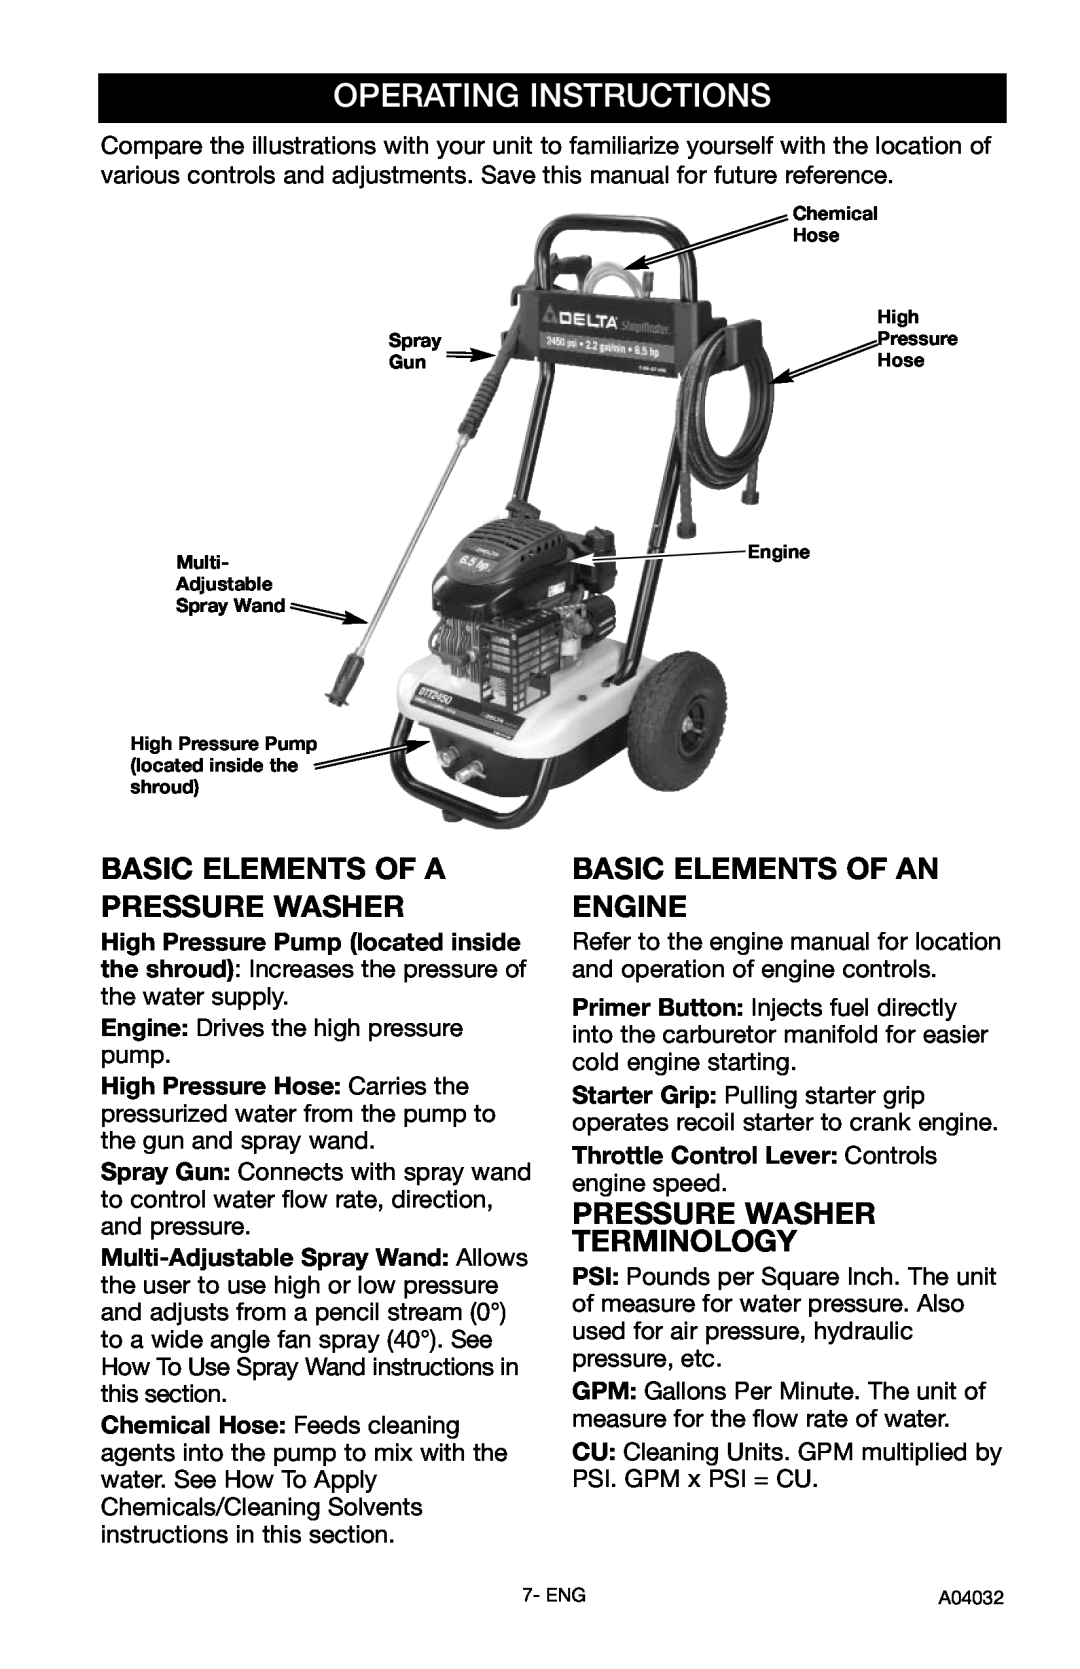 Delta DTT2450 instruction manual Operating Instructions, Basic Elements Of A Pressure Washer, Basic Elements Of An Engine 